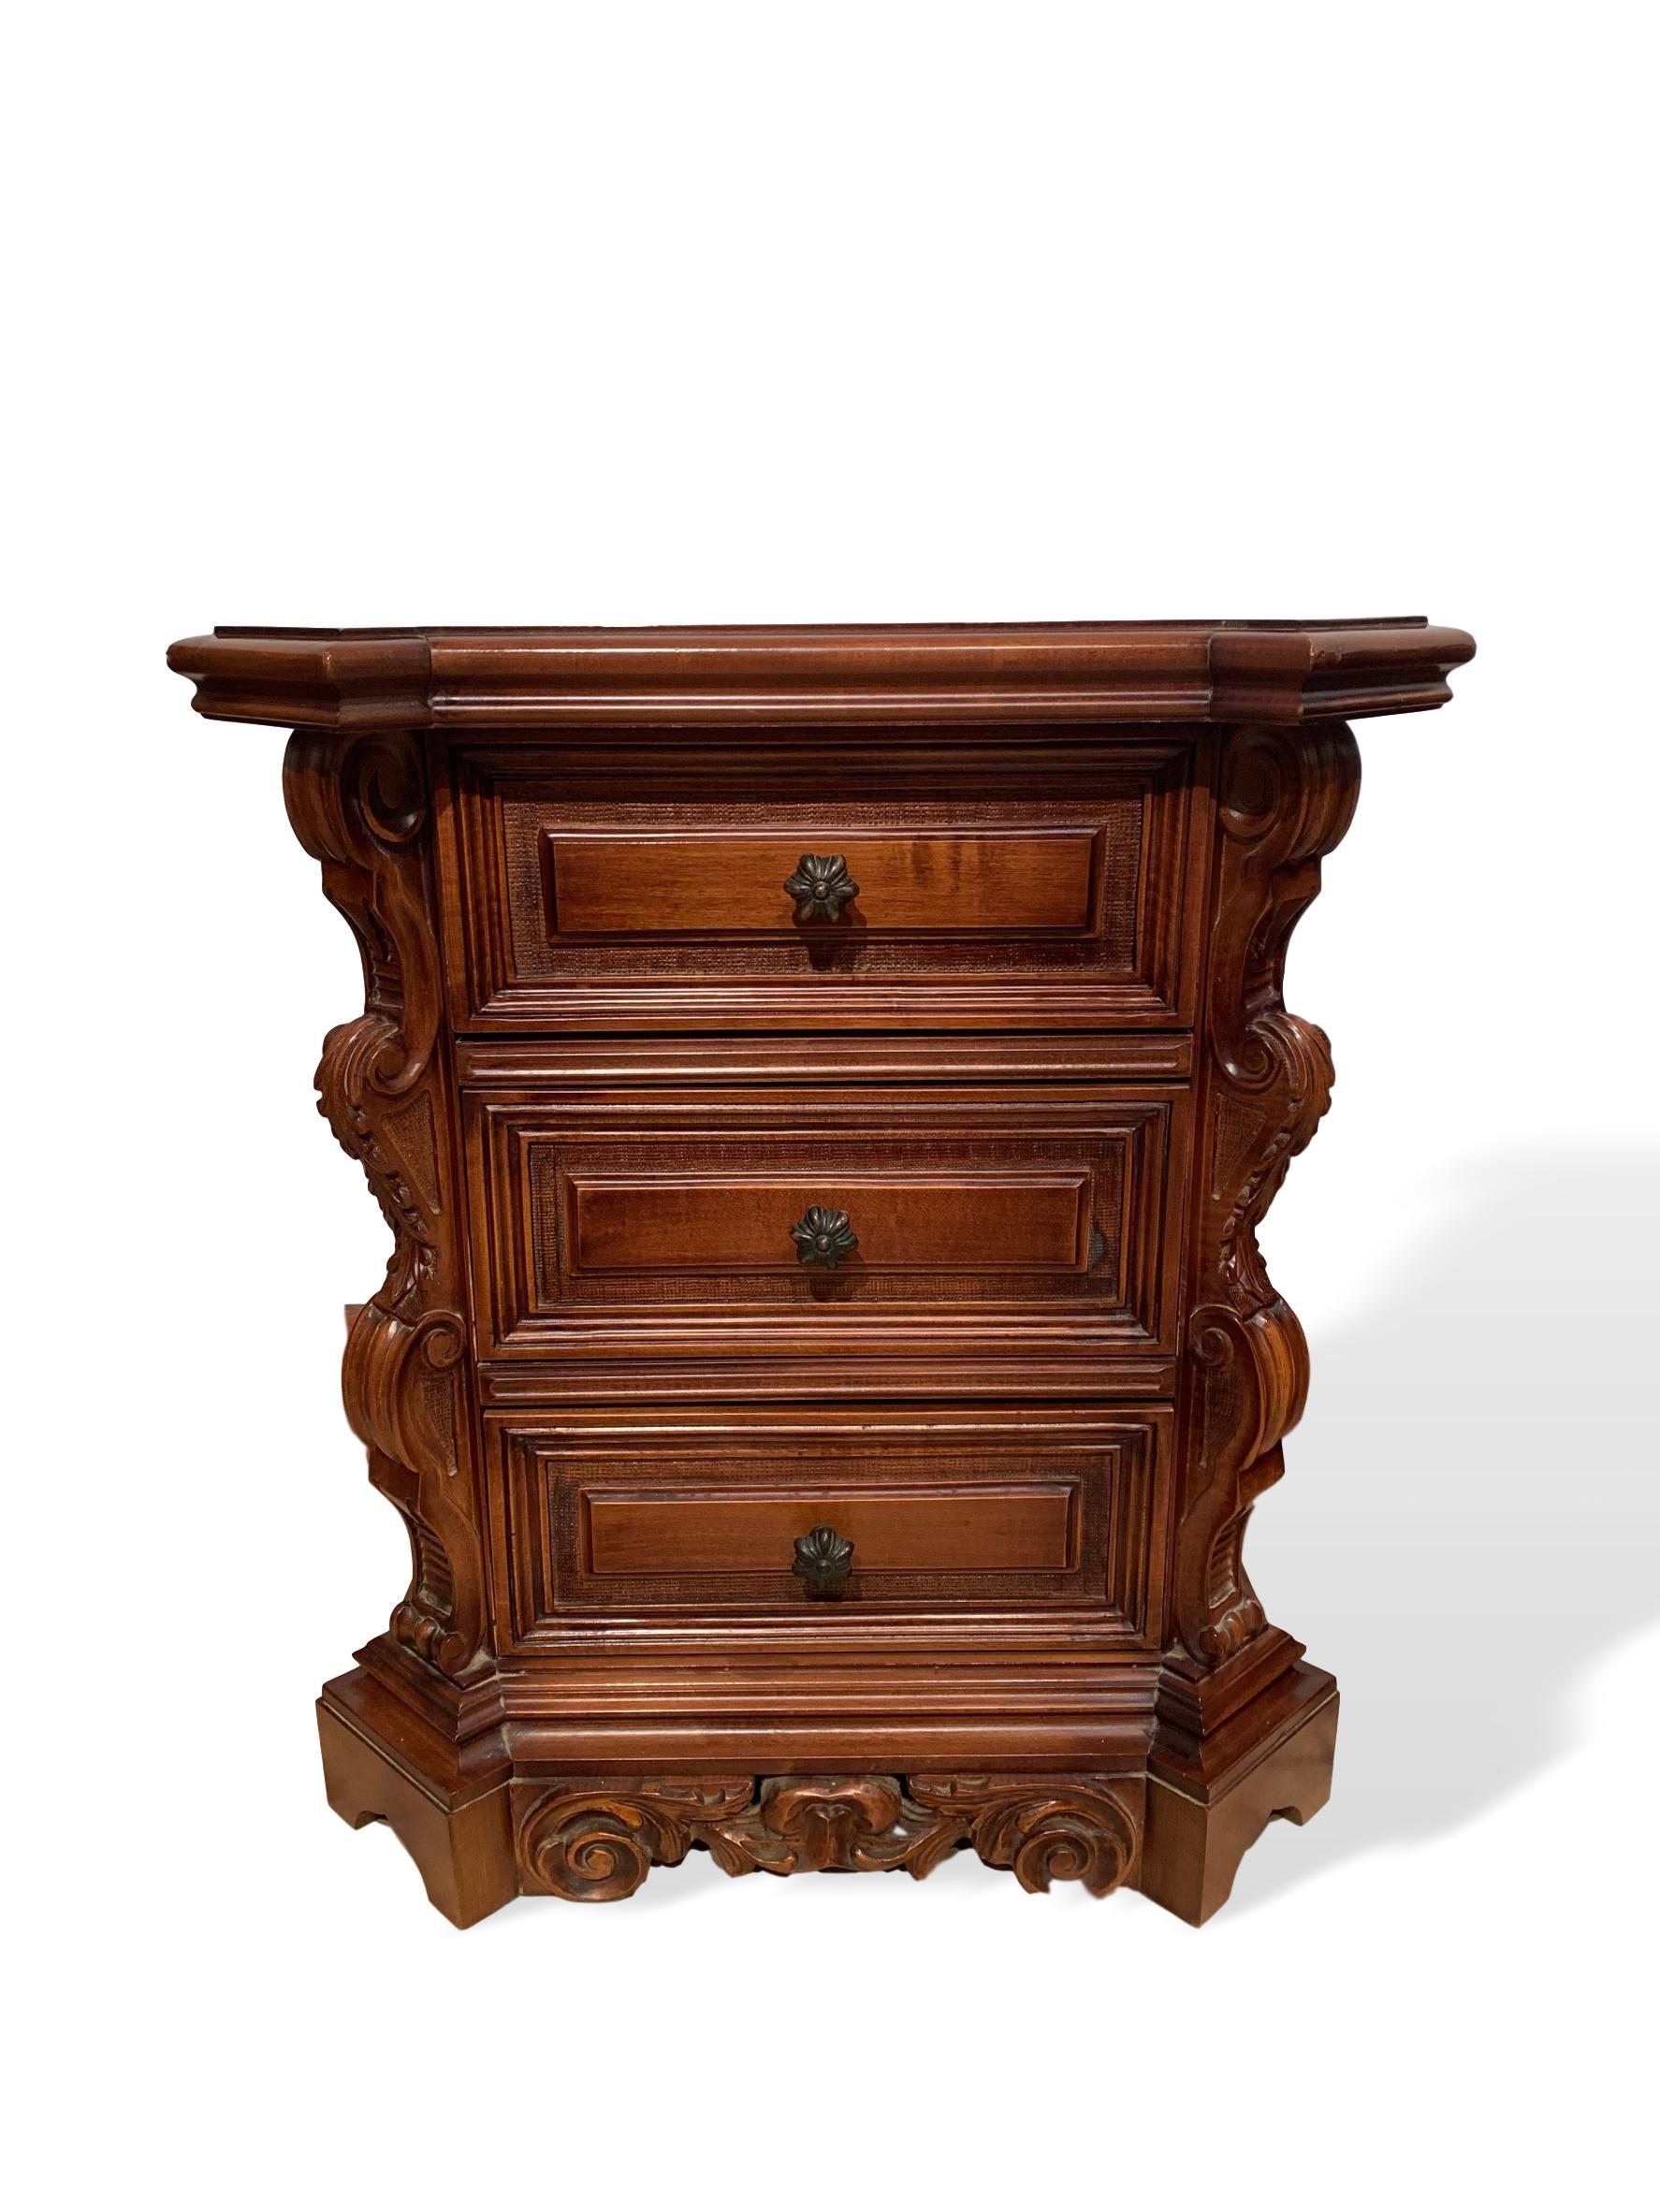 With a canted and stepped top, above three shaped and raised paneled drawers, flanked by canted corners with hand carved and graduated lonic columns, on a carved and molded bracket plinth base.

Measures: D-16 x W-26 x H-28 inches.